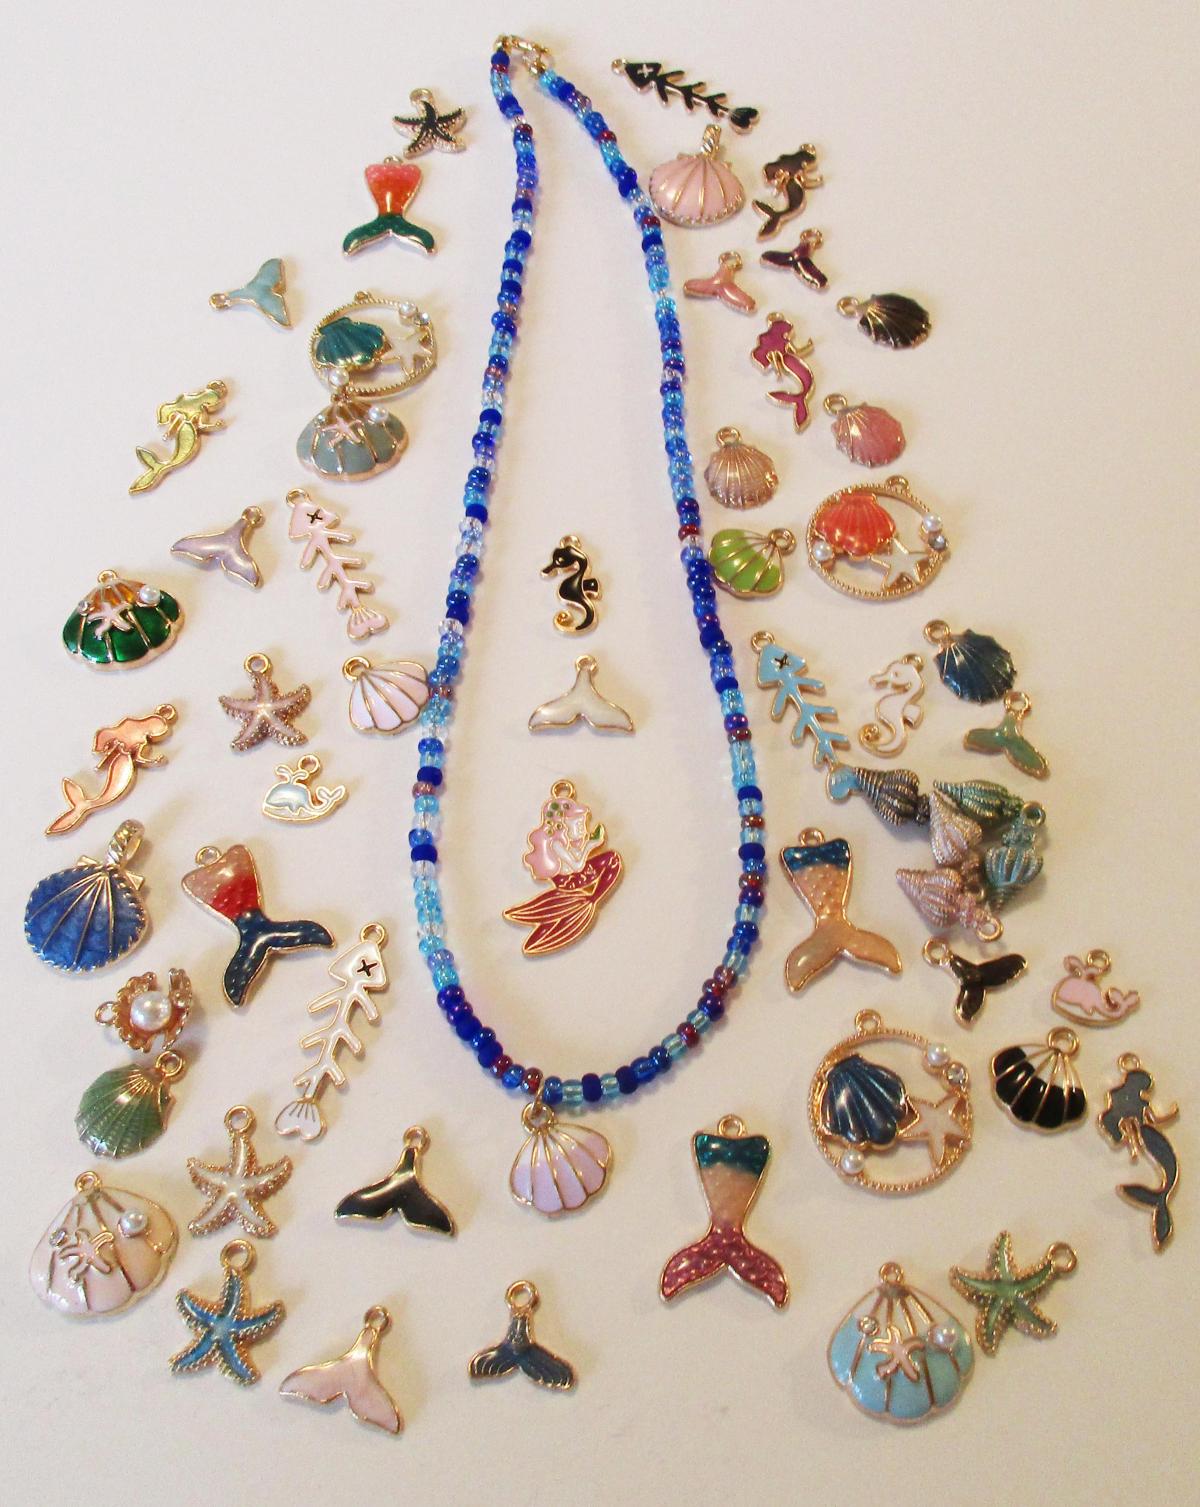 blue beaded necklace with pink shell charm, surrounded by other enamel charms in ocean themes